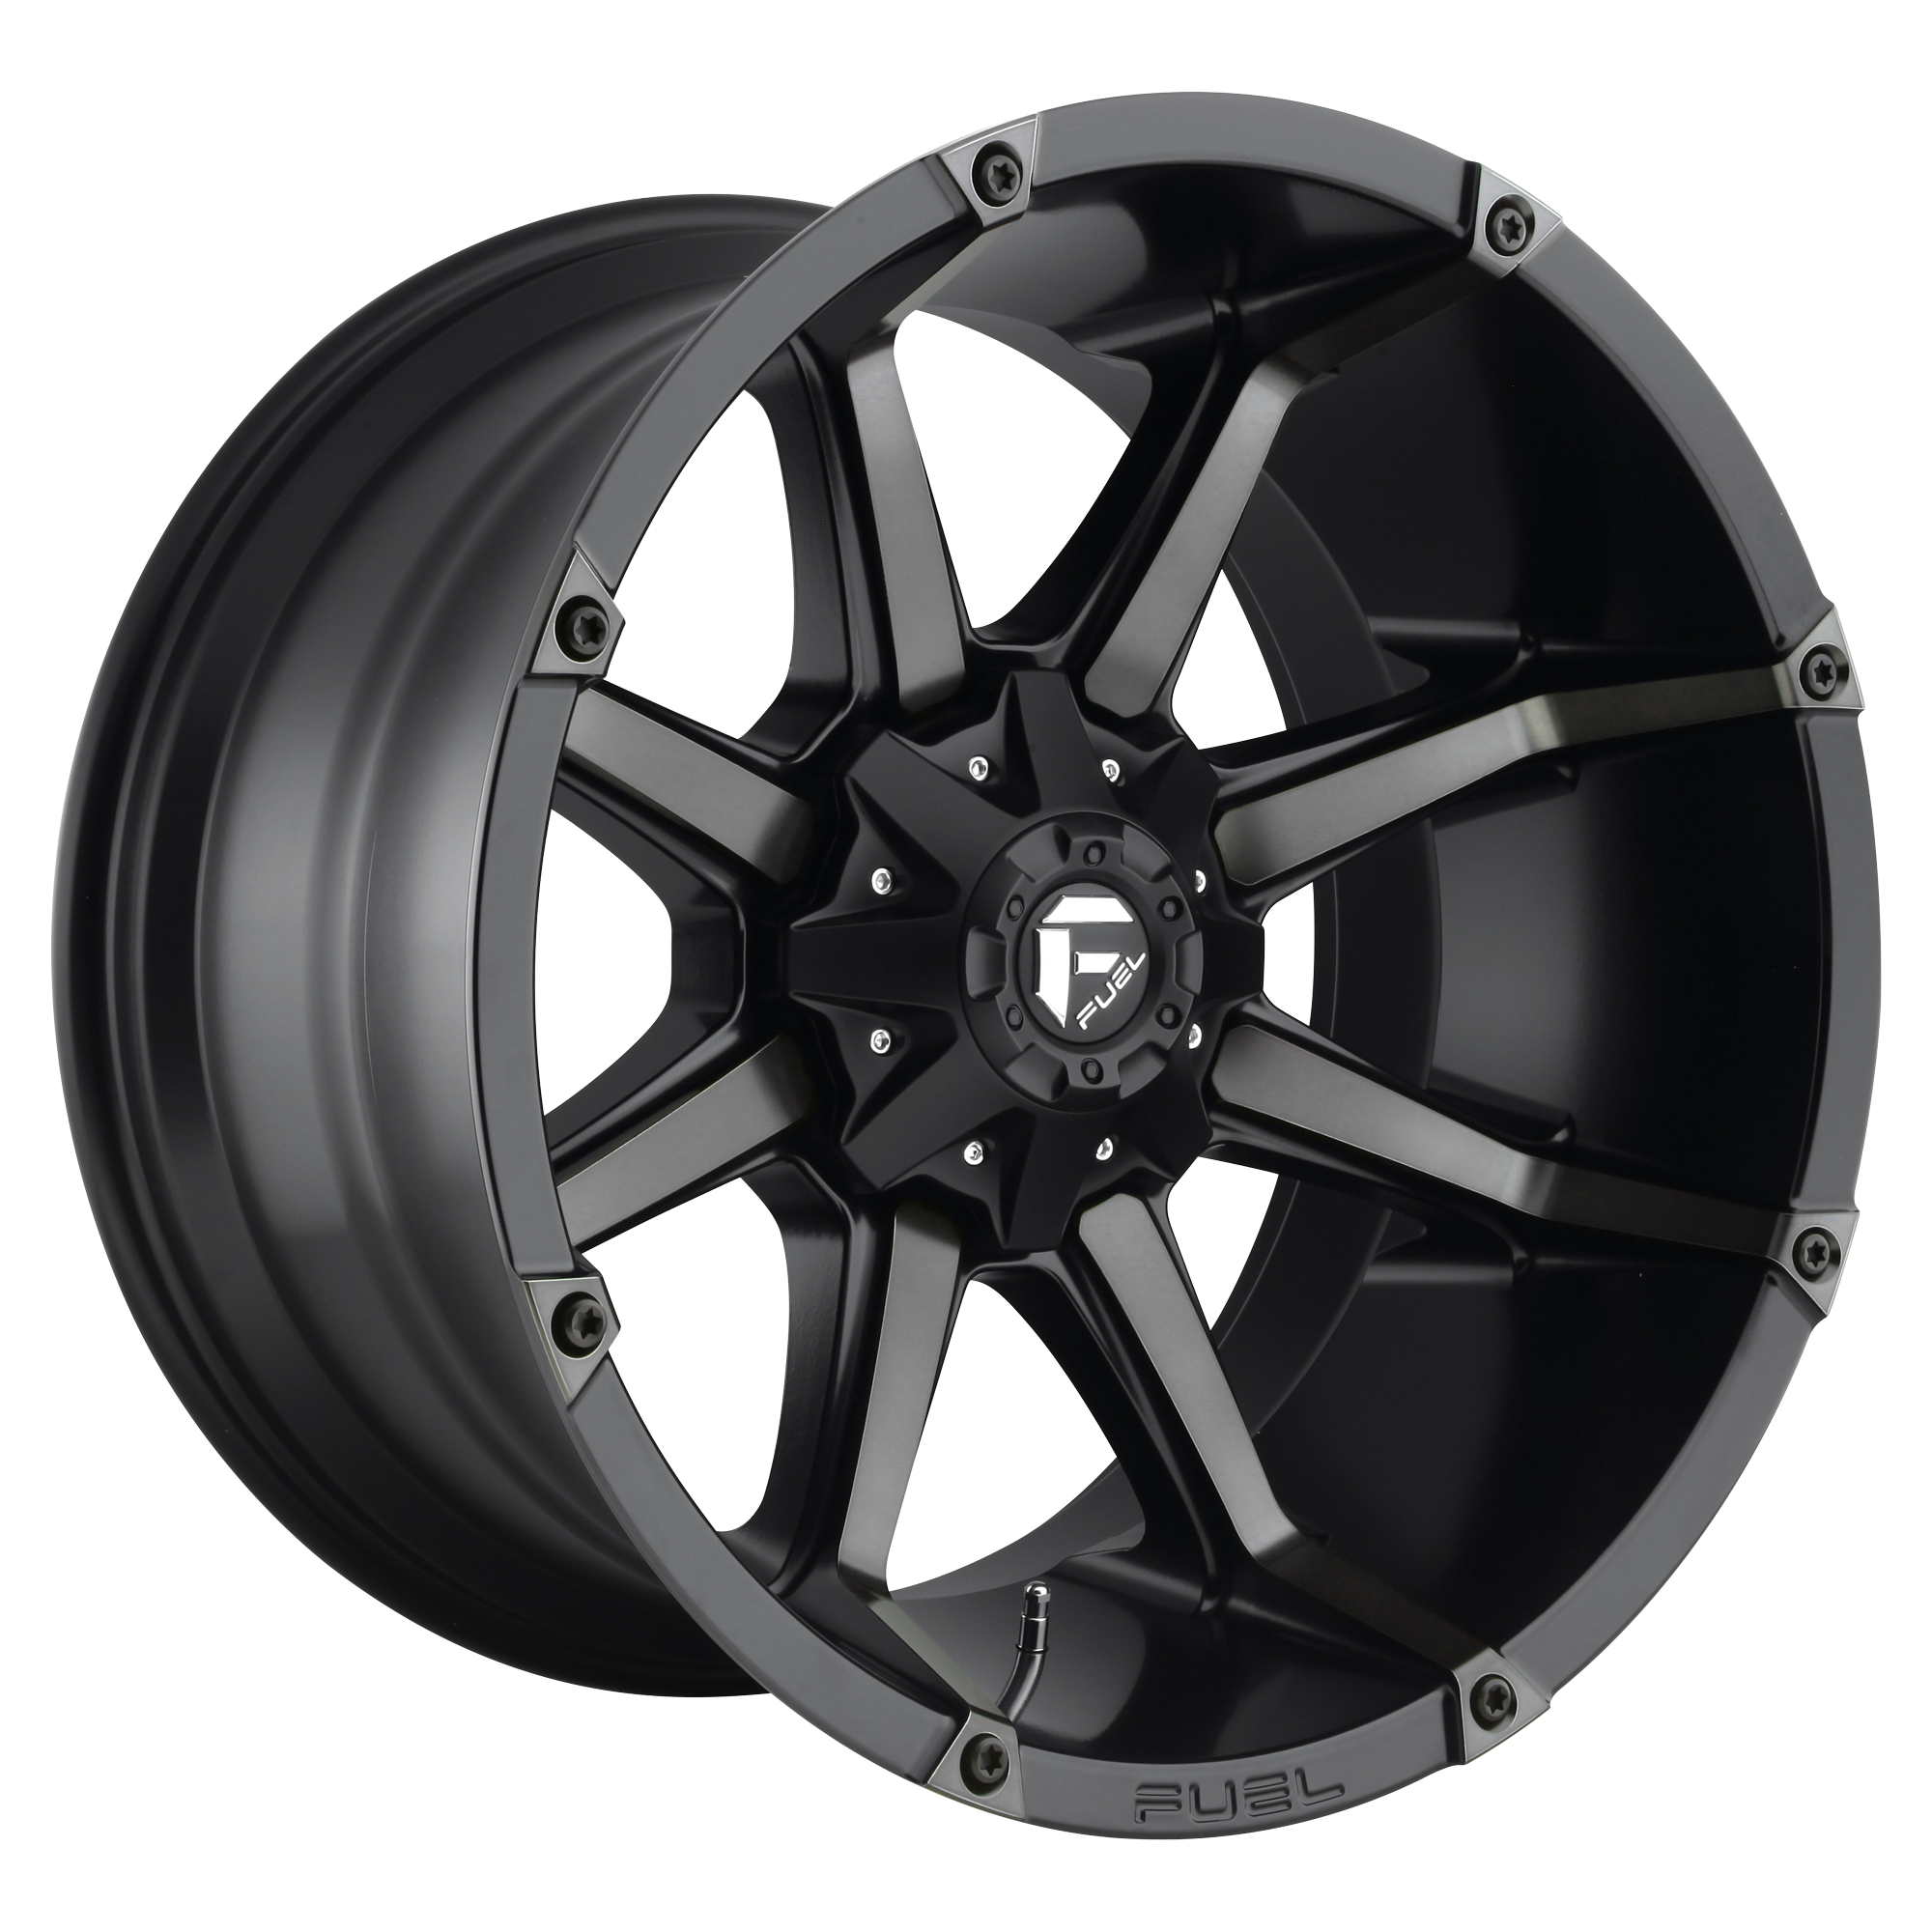 COUPLER 20x10 5x114.30/5x127.00 MATTE BLACK DOUBLE DARK TINT (-12 mm) - Tires and Engine Performance